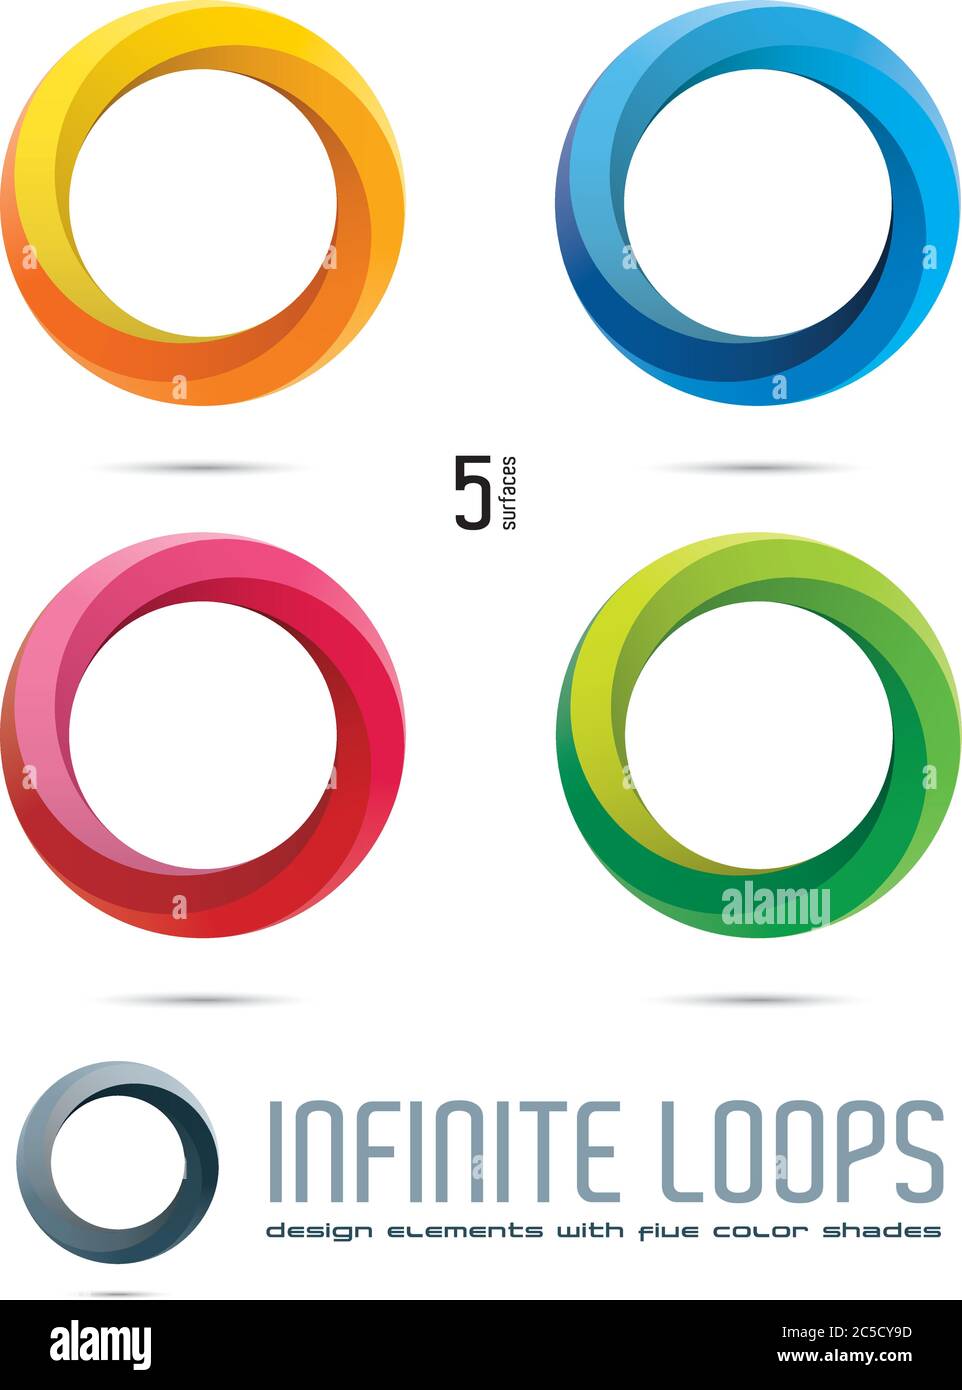 Impossible Infinite Loop Vector Design Elements with five surfaces and color shades. Easily editable with global color swatches. Stock Vector